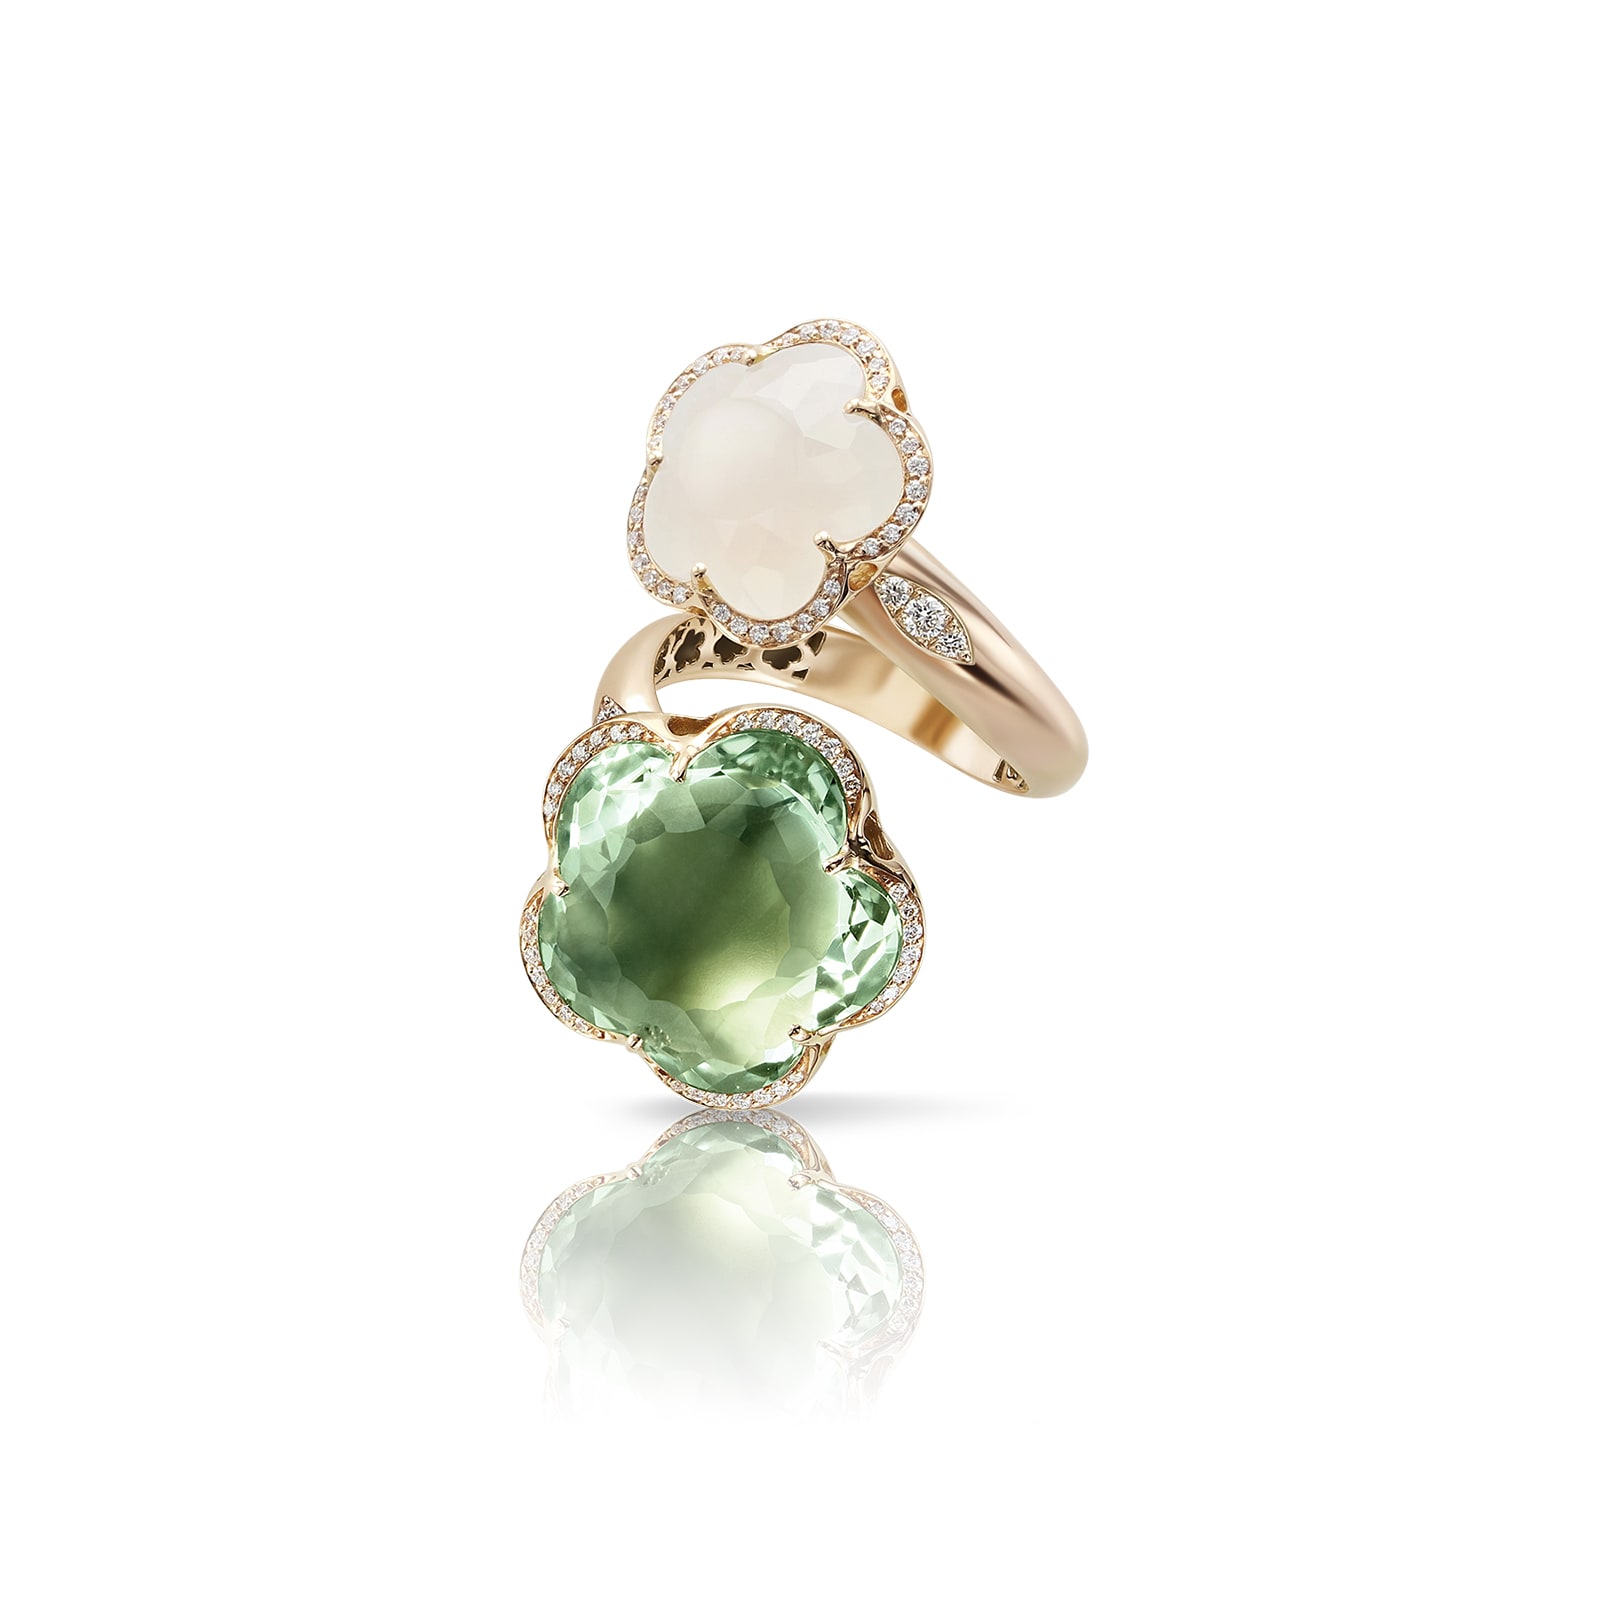 Bon Ton Dolce Vita Contrarie Ring in 18ct Rose Gold with Prasiolite, Milky Quartz and Diamonds - Ring Size M